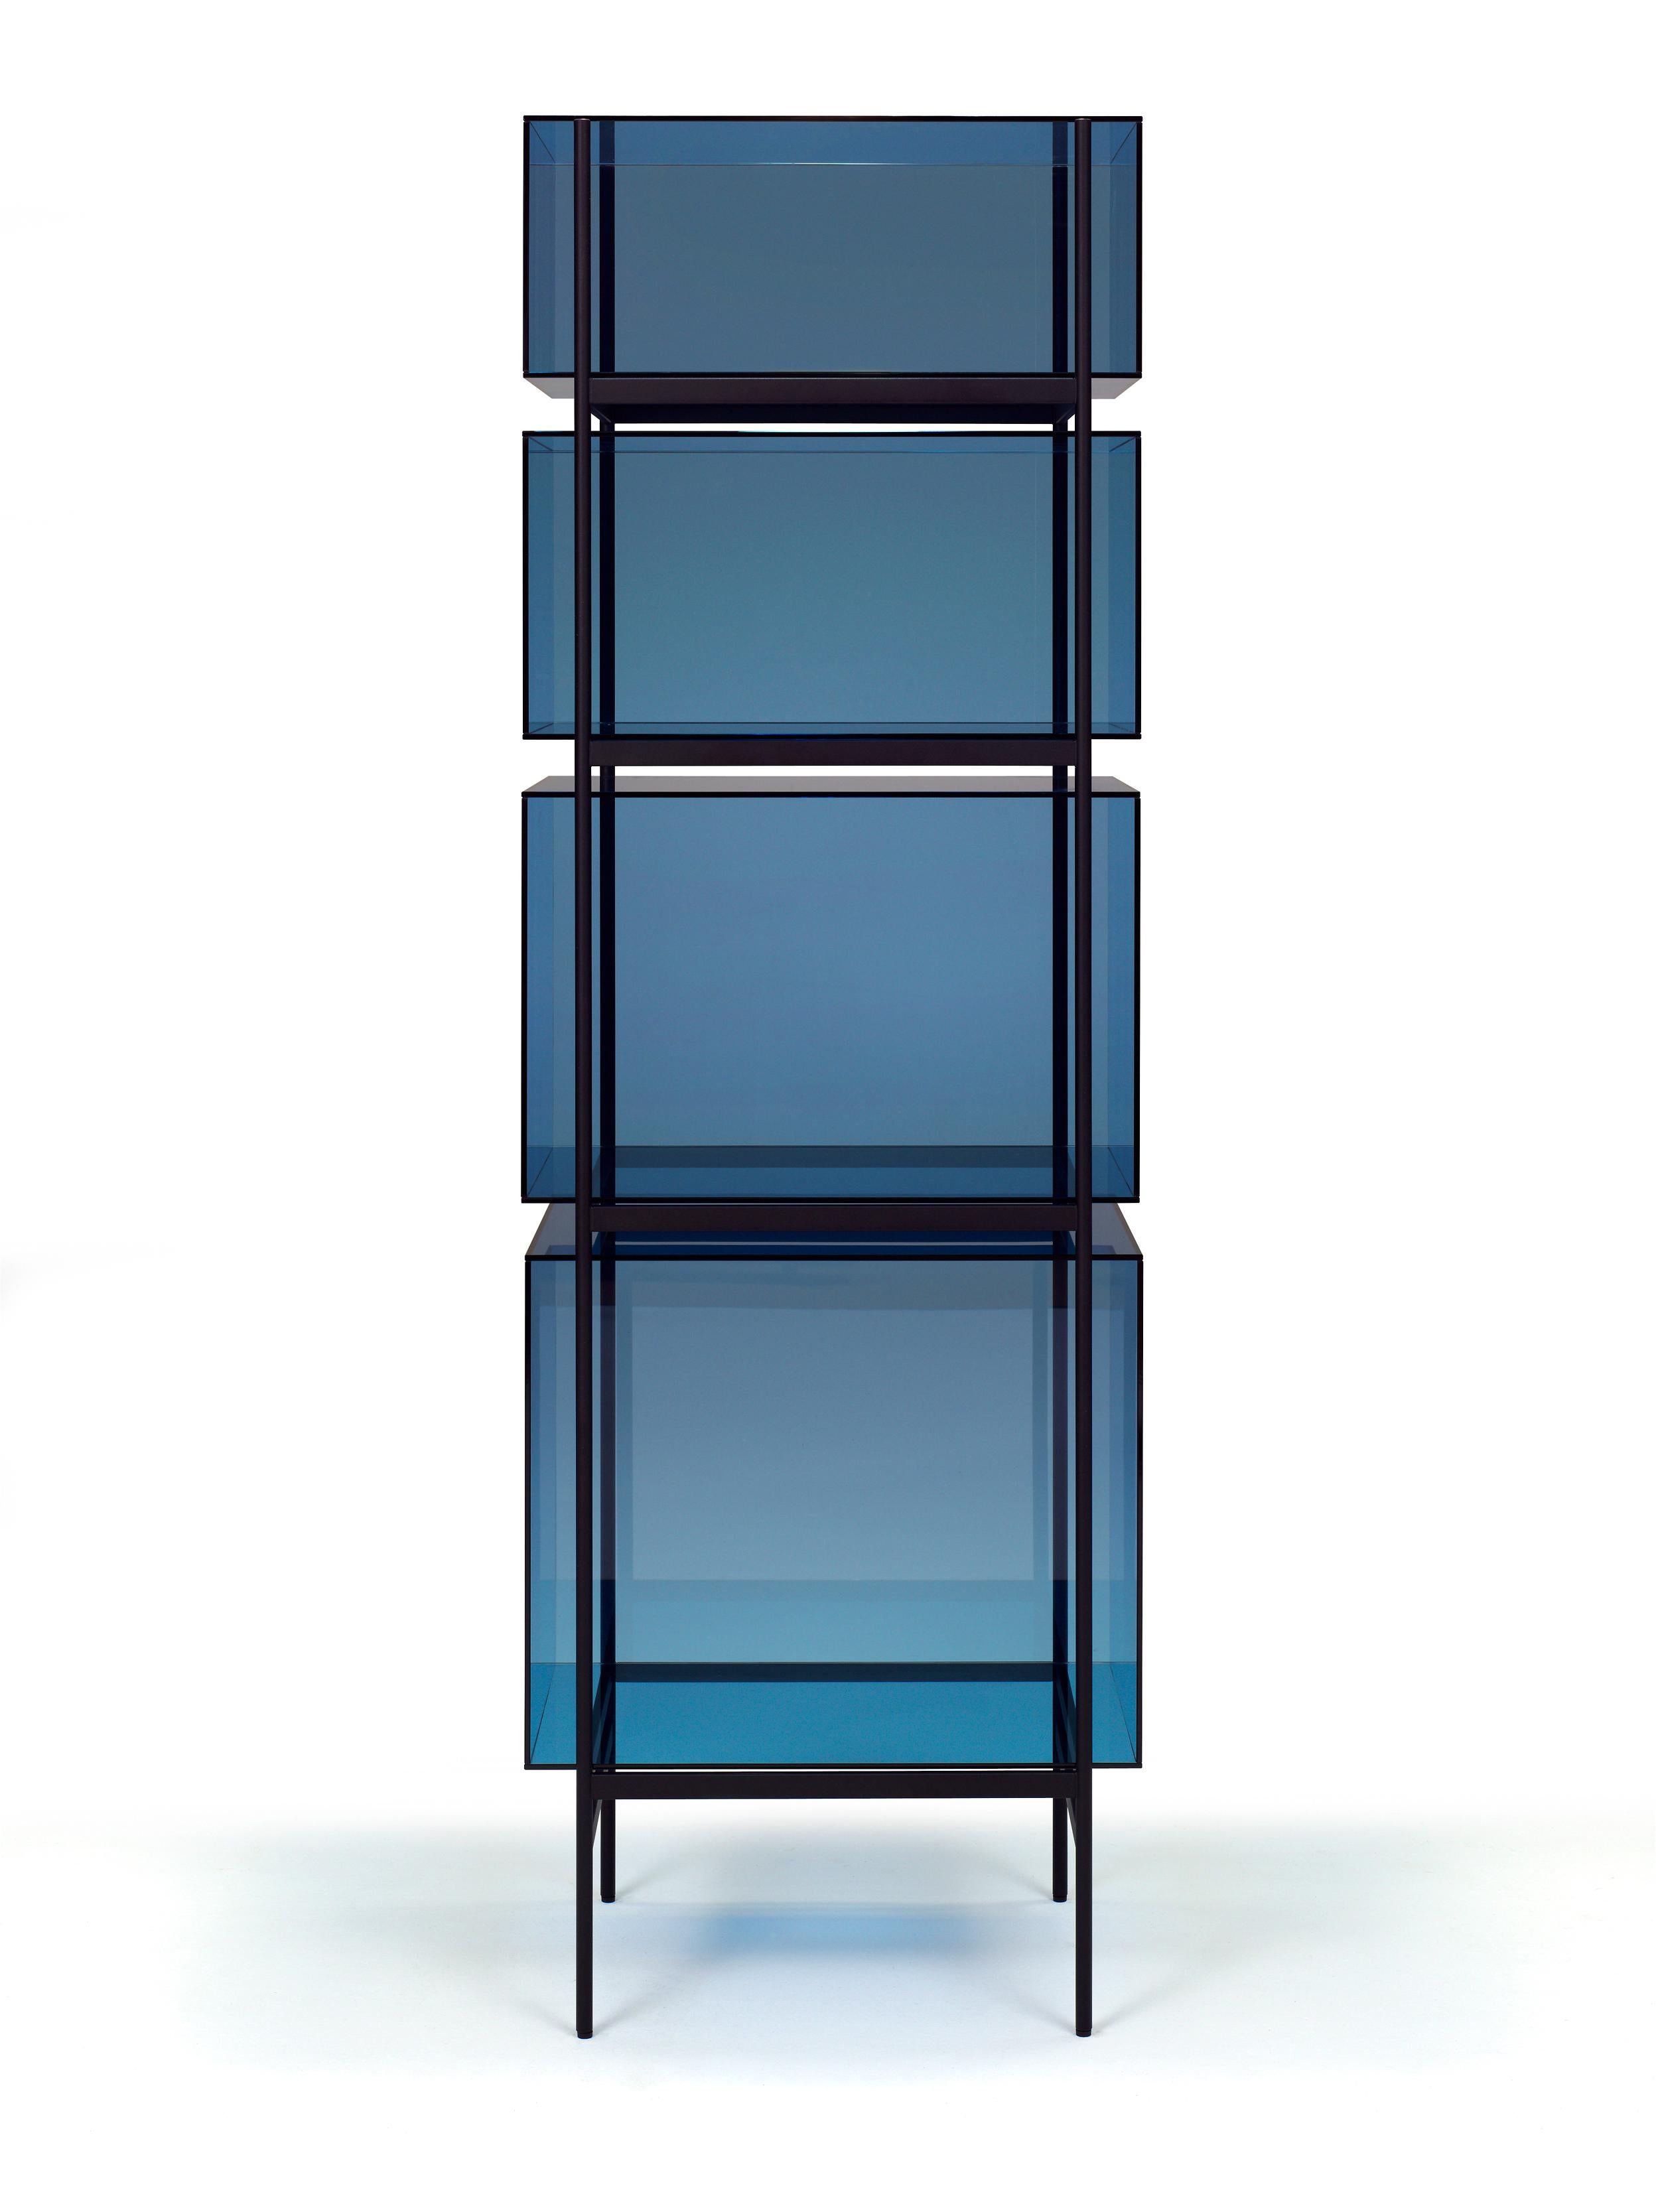 Lyn high blue black cabinet by Pulpo
Dimensions: D60 x W45 x H185 cm
Materials: glass; powder coated steel

Also available in different colours. 

Studio Visser & Meijwaard describe their conception of lyn as a “graphic interplay between glass